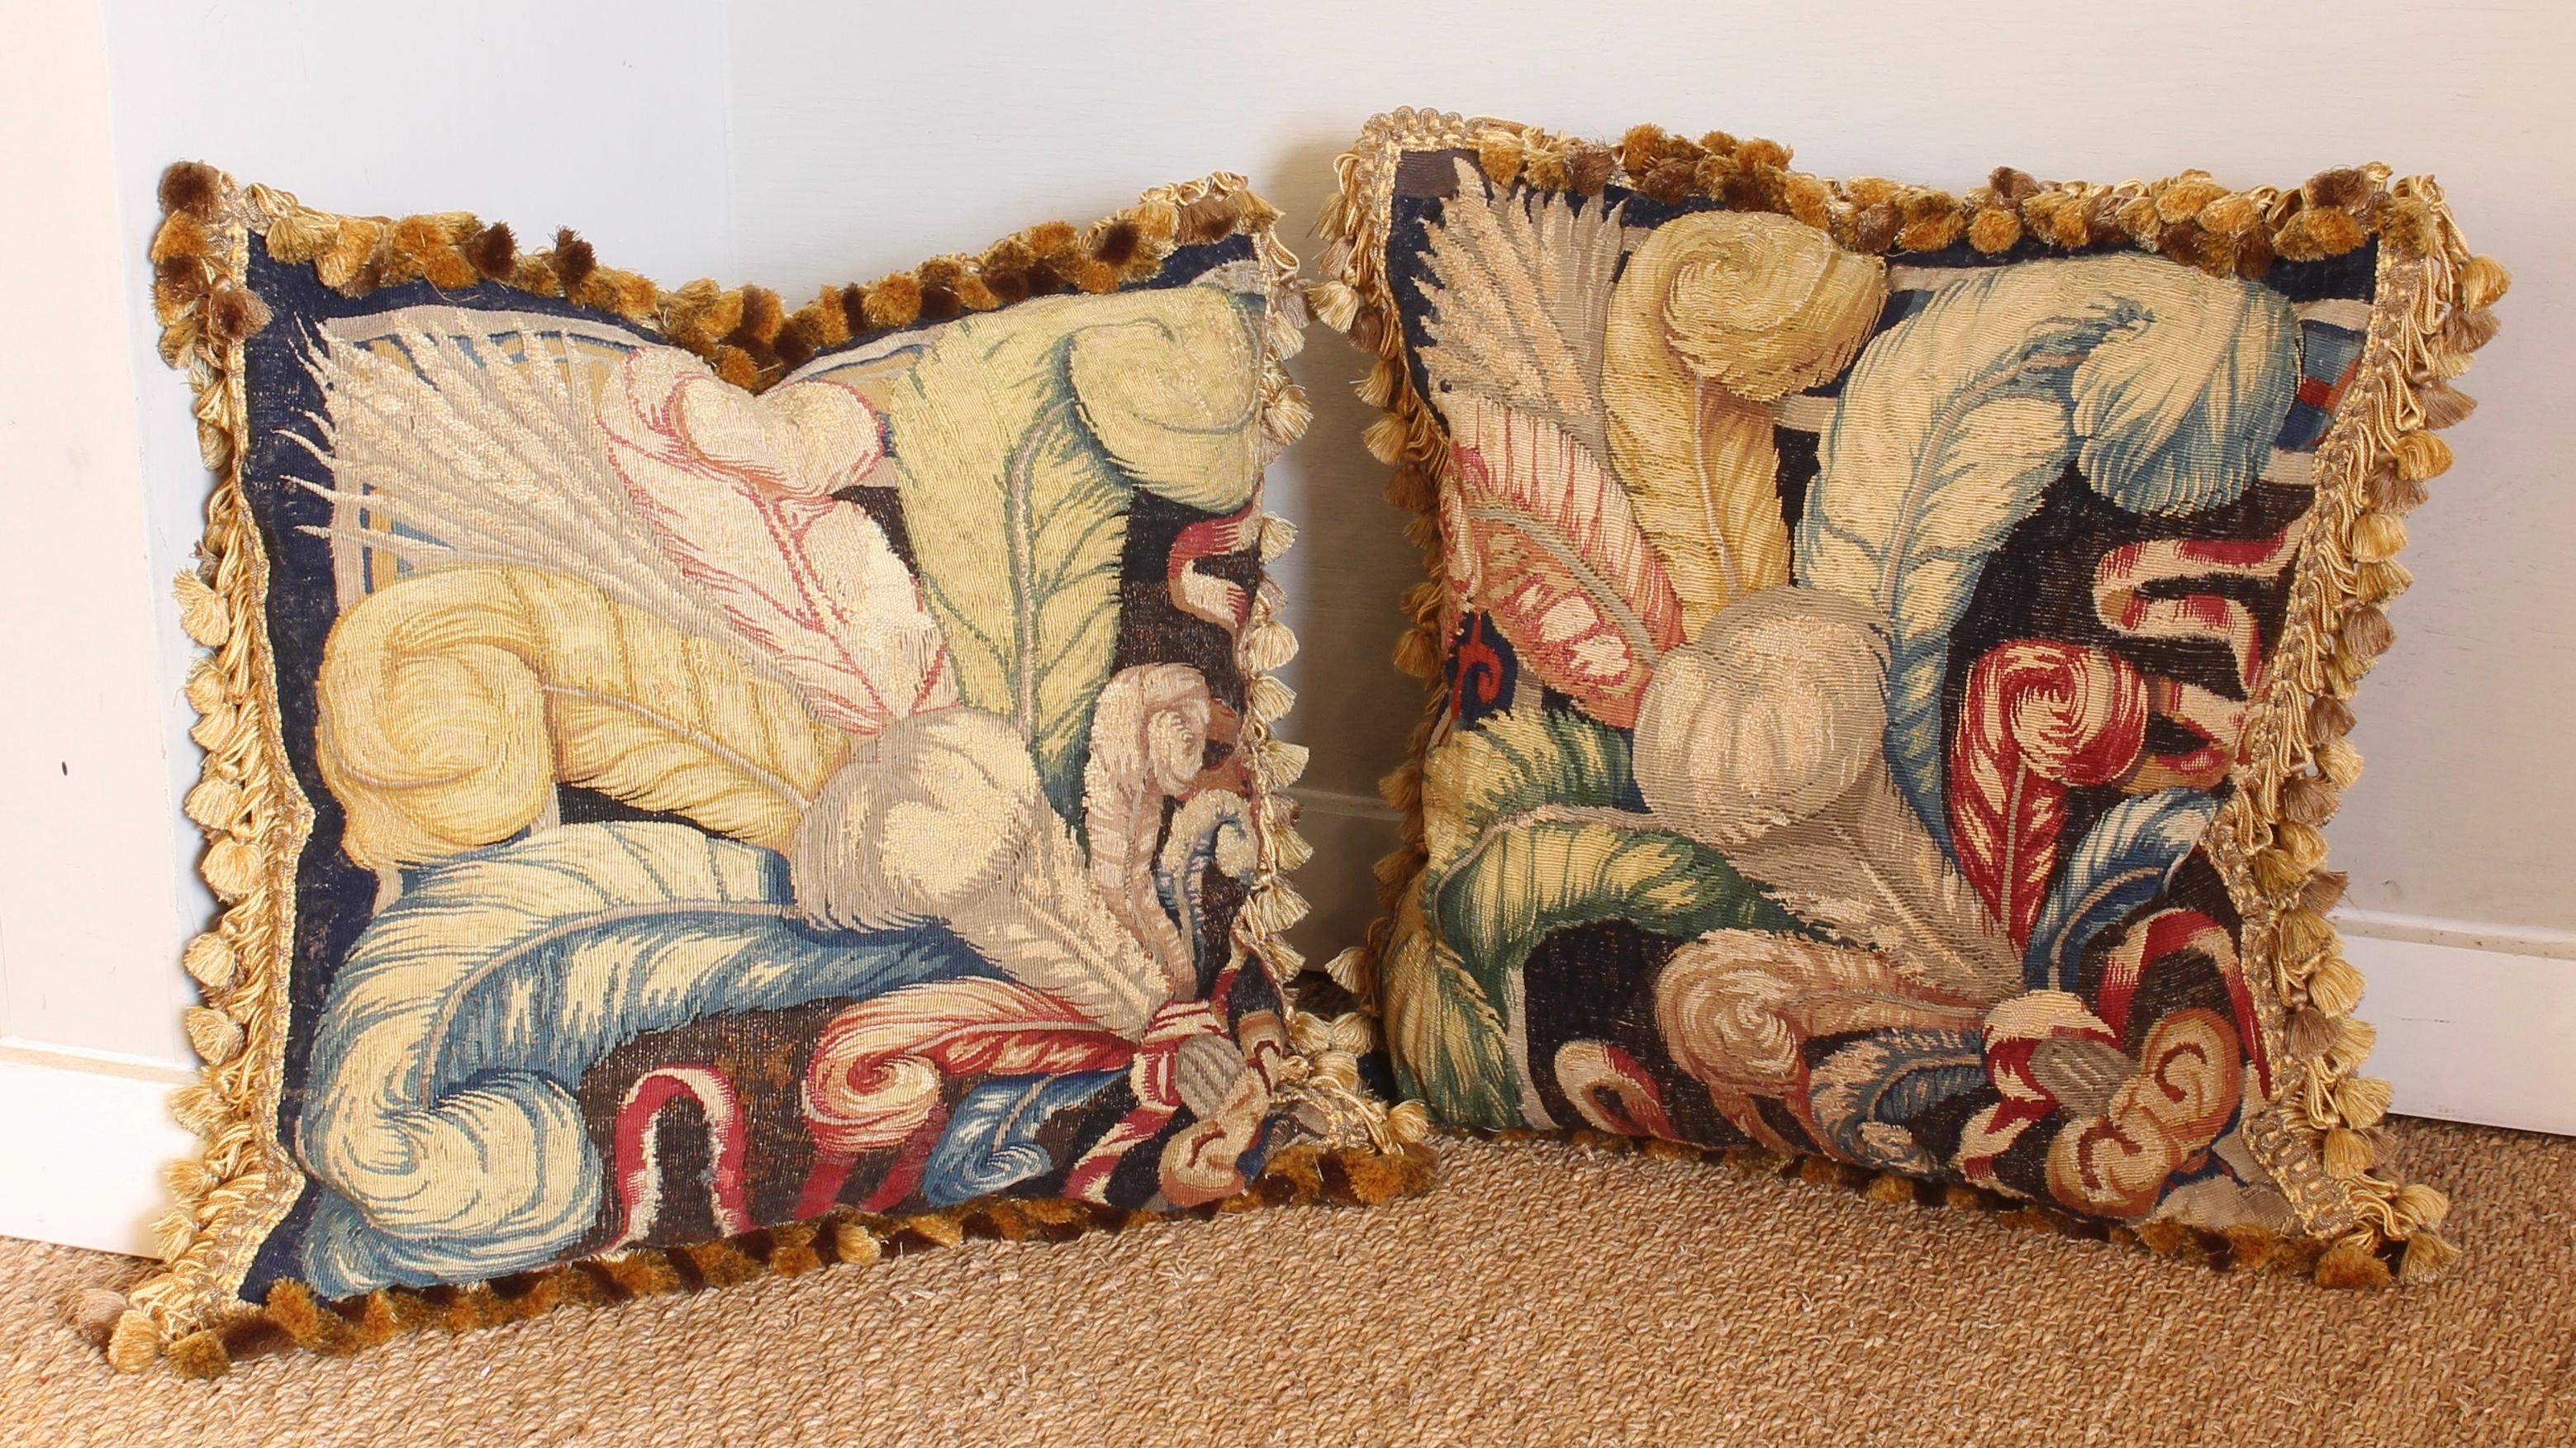 A pair of large down-filled pillows fashioned from a beautiful early 18th century. Flemish tapestry fragments depicting feathers in rich jewel tones.